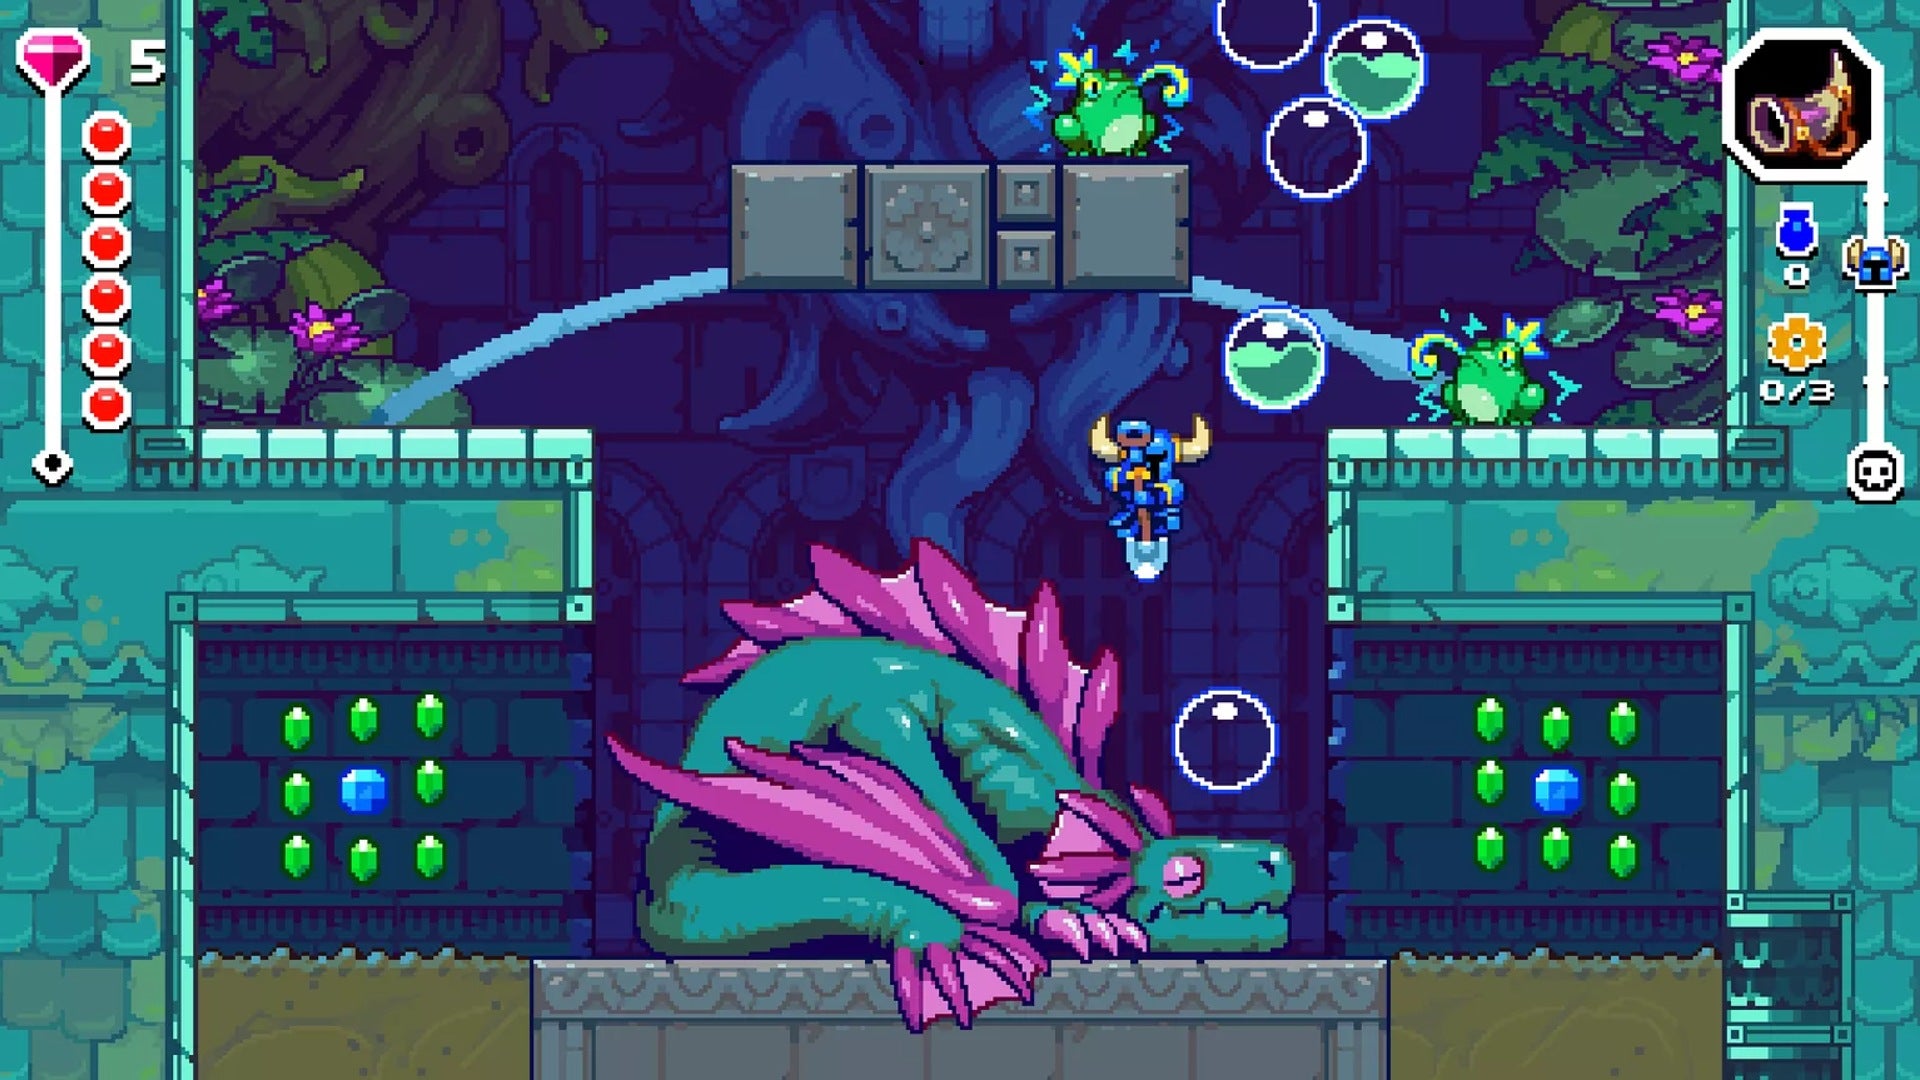 Shovel Knight dig is a procedurally generated platformer coming to Steam from Yacht Club Games and Nitrome in September 2022.